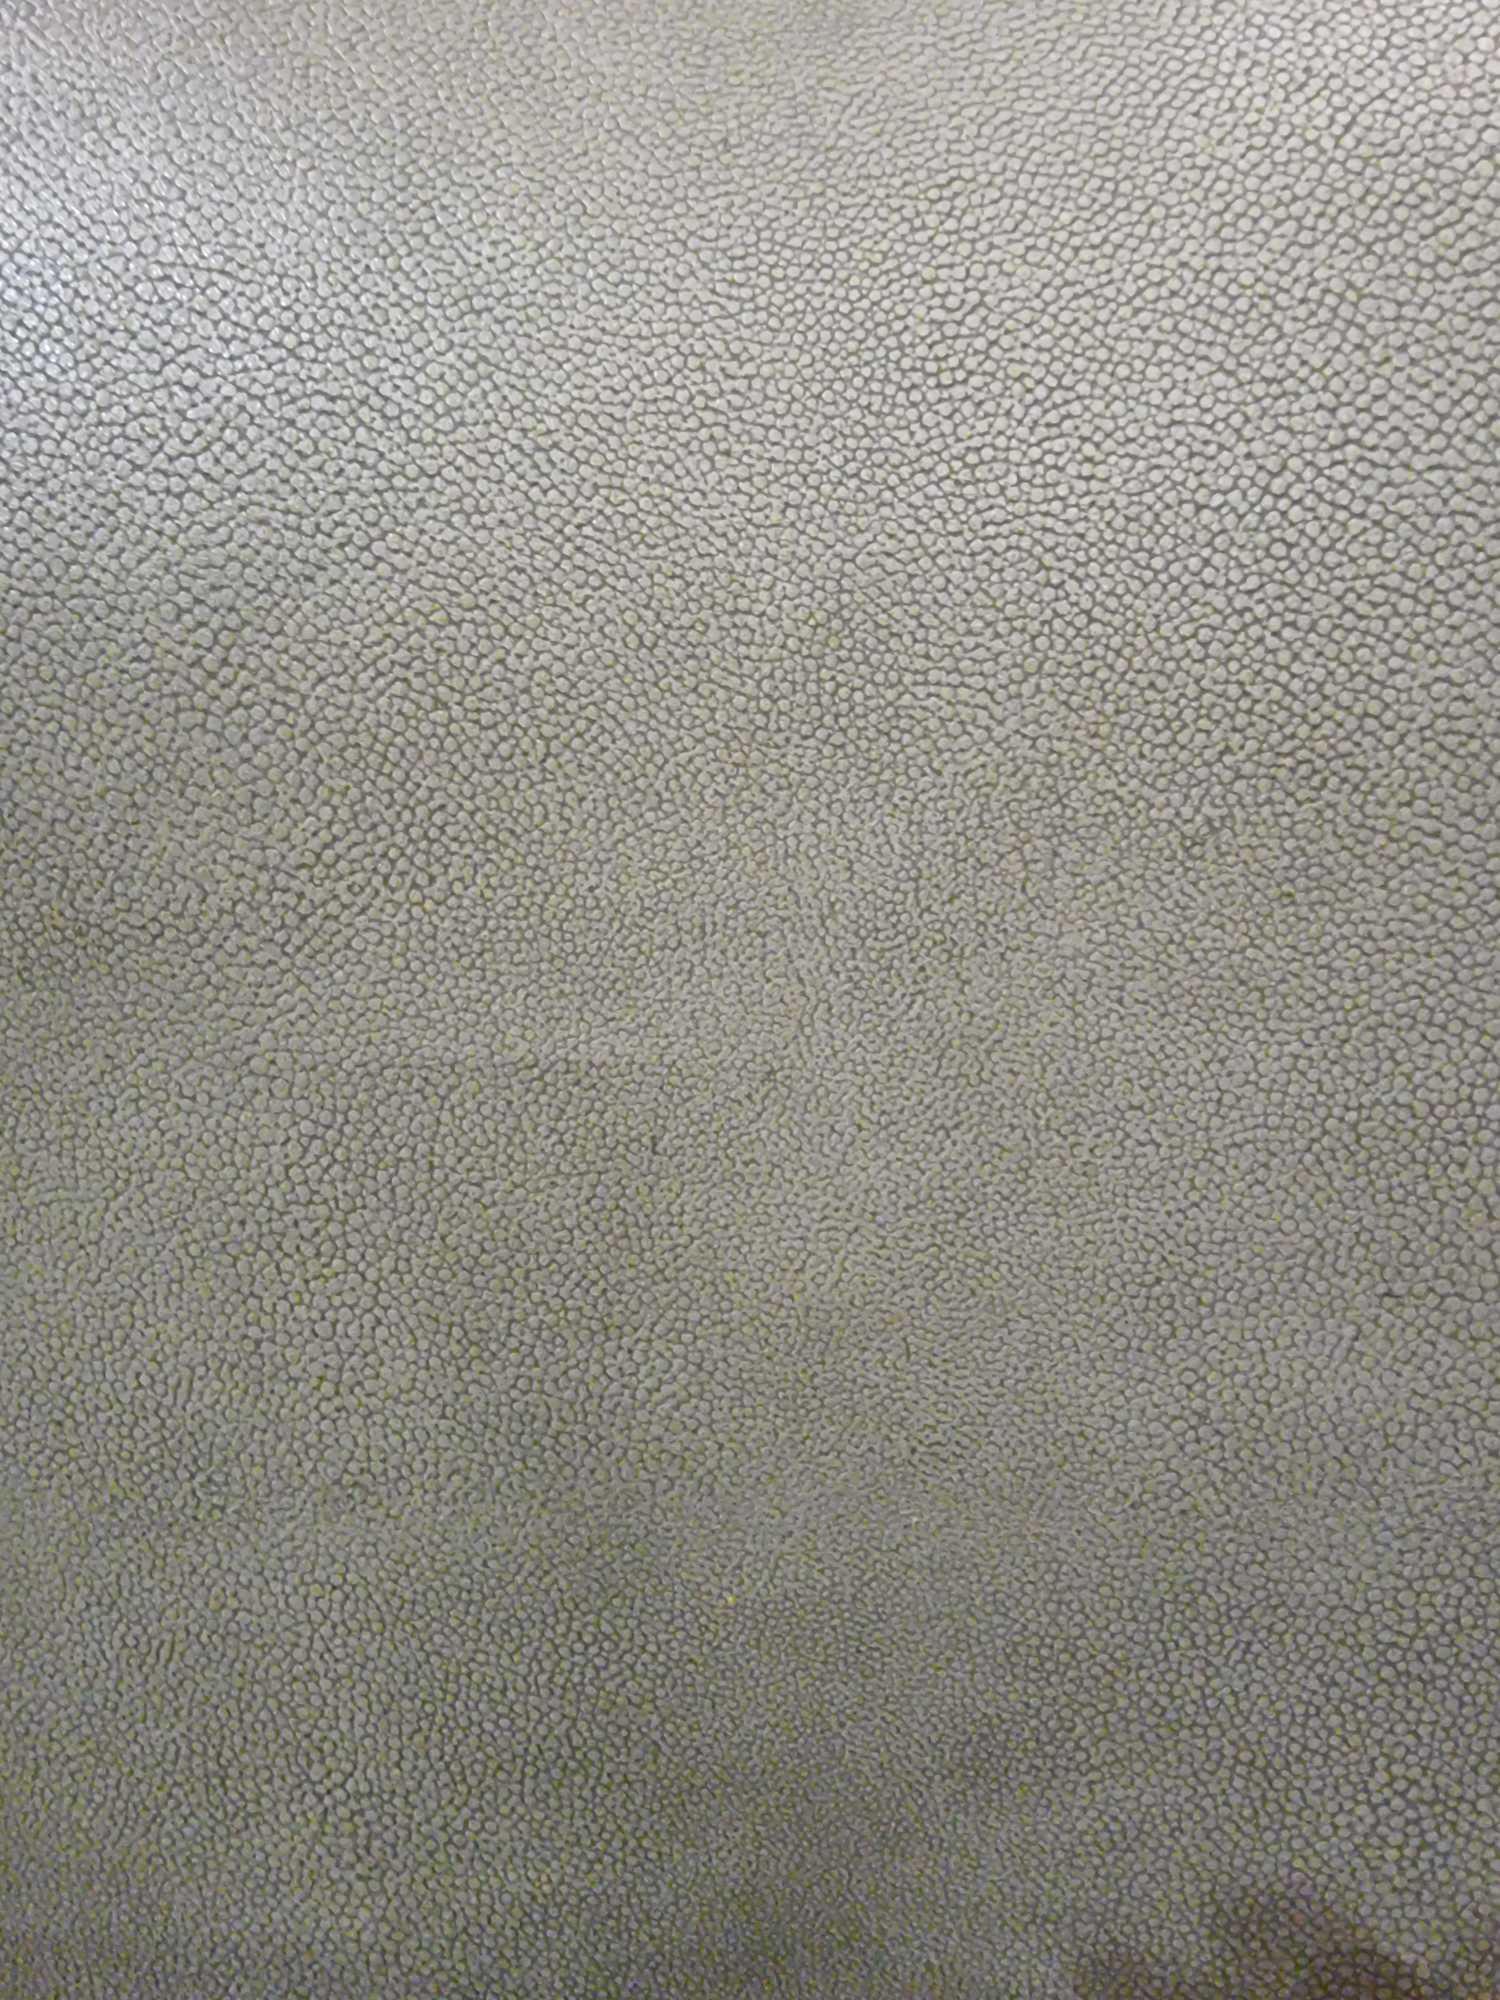 Sage Leather Hide approximately 4.86mÂ² 2.7 x 1.8cm - Image 2 of 2